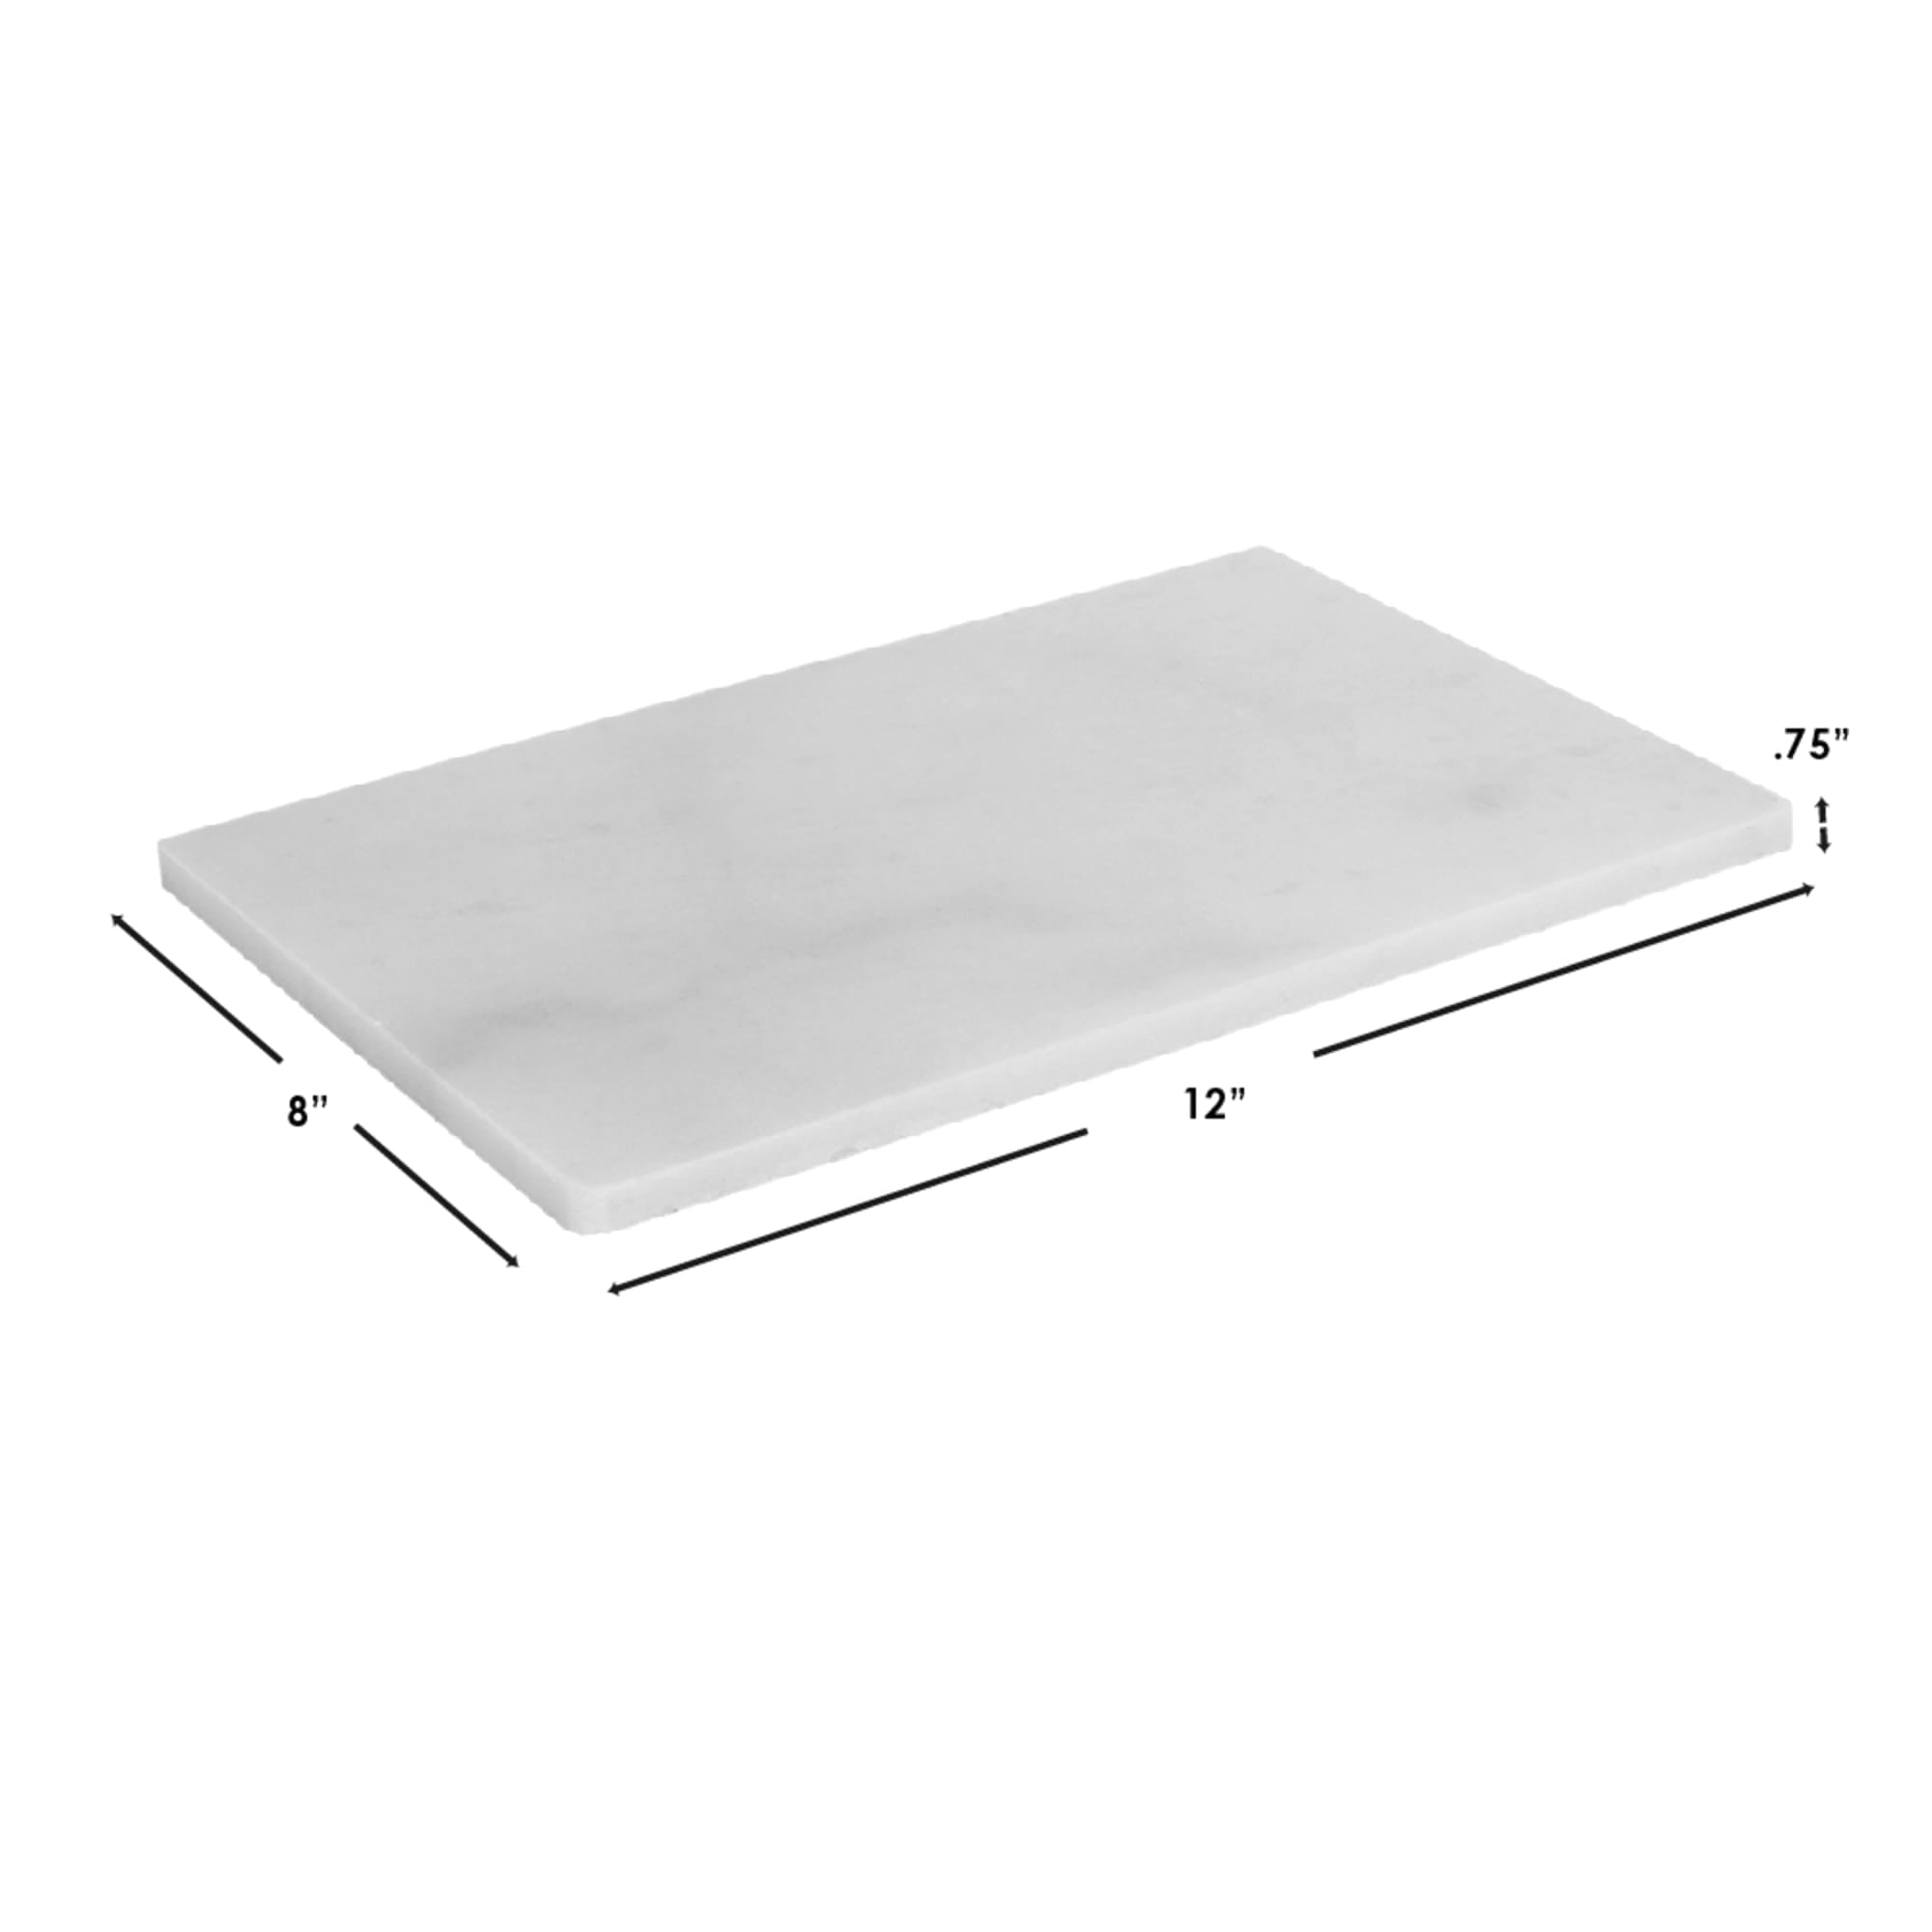 Home Basics 8" x 12" Marble Cutting Board, White $8.00 EACH, CASE PACK OF 8